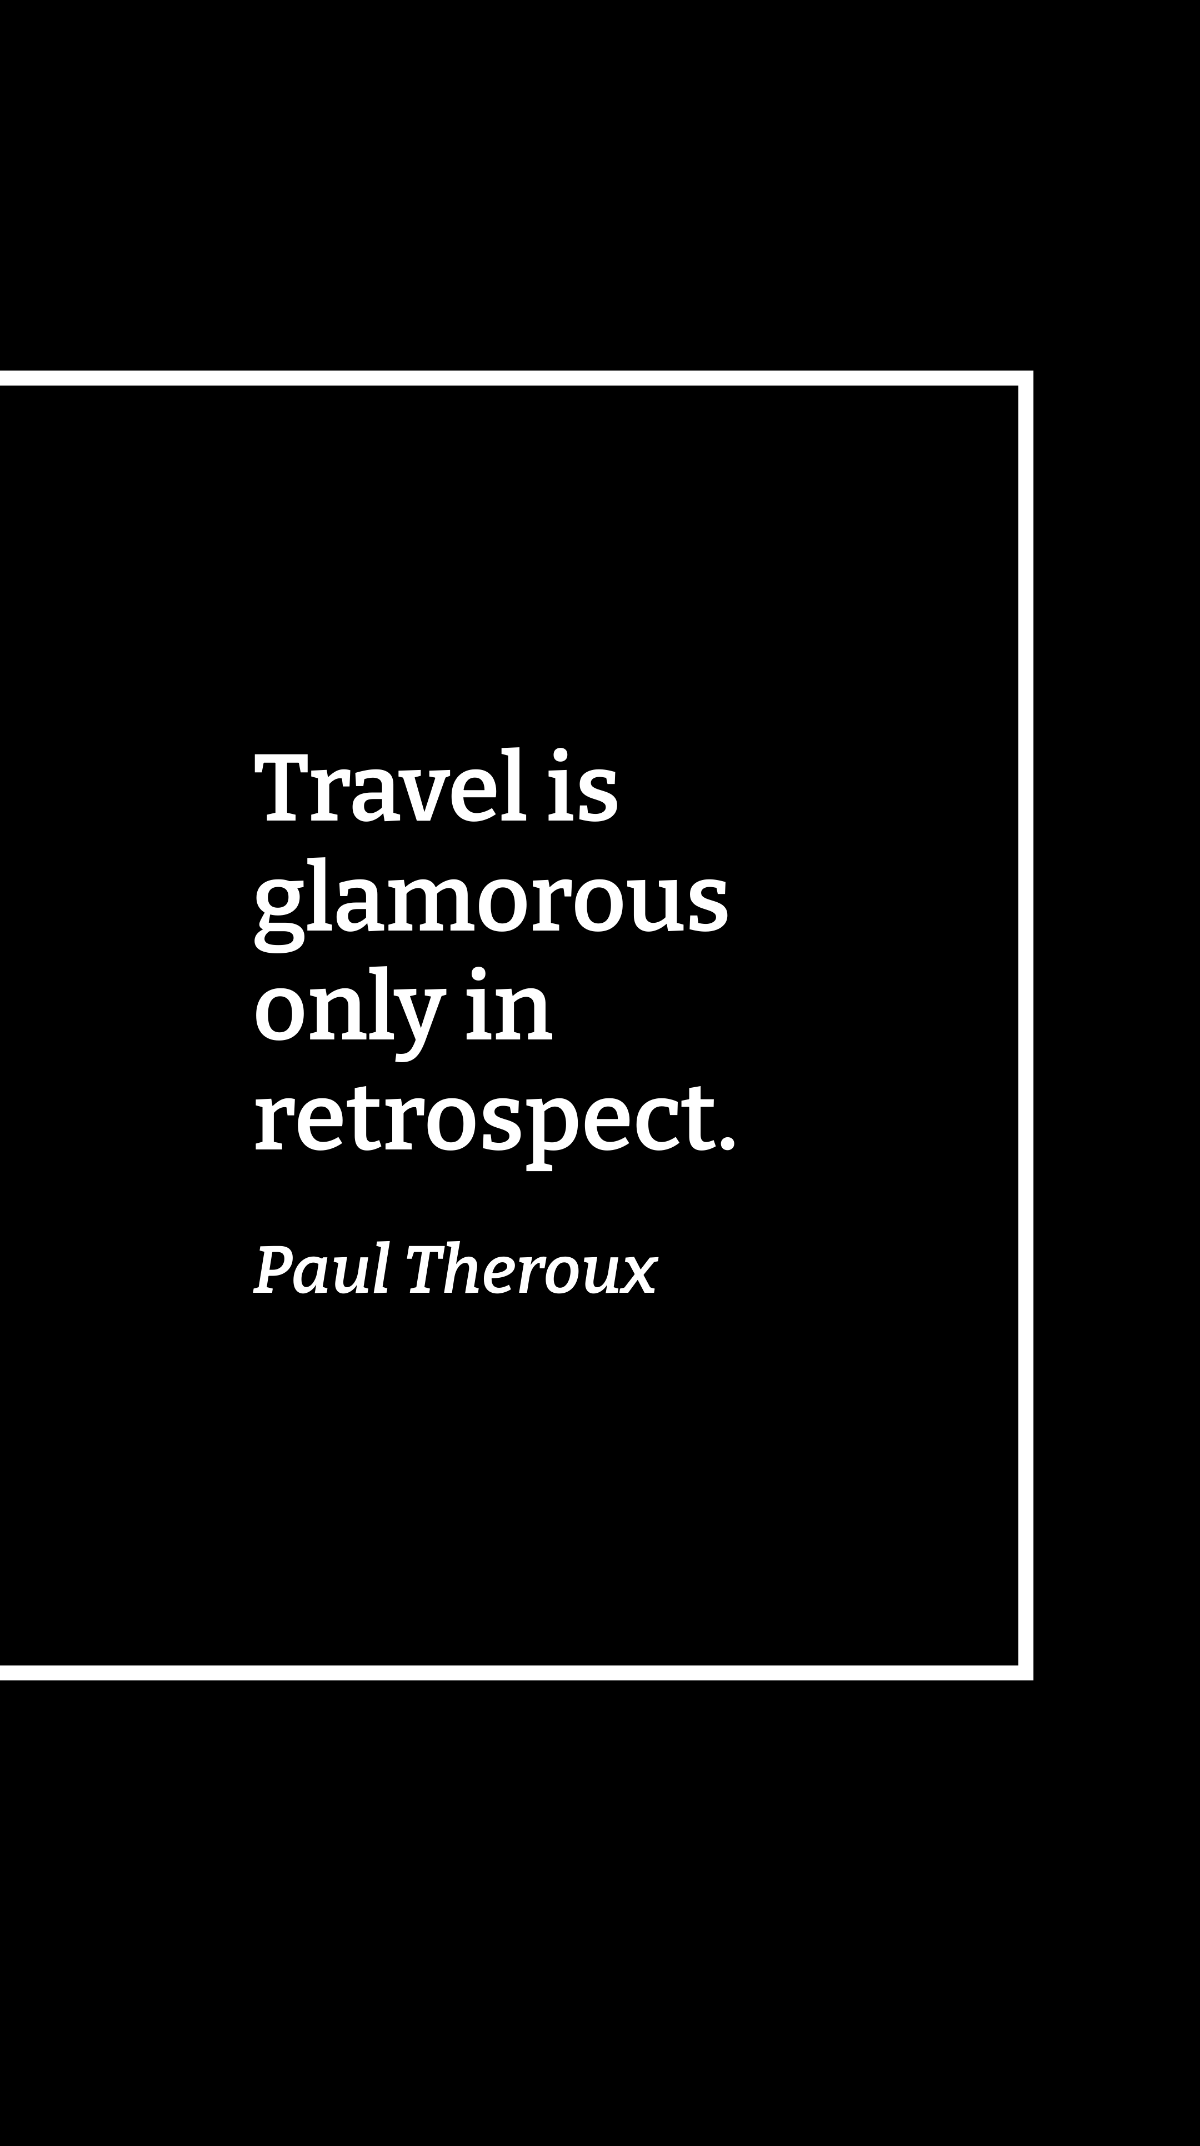 Paul Theroux - Travel is glamorous only in retrospect.